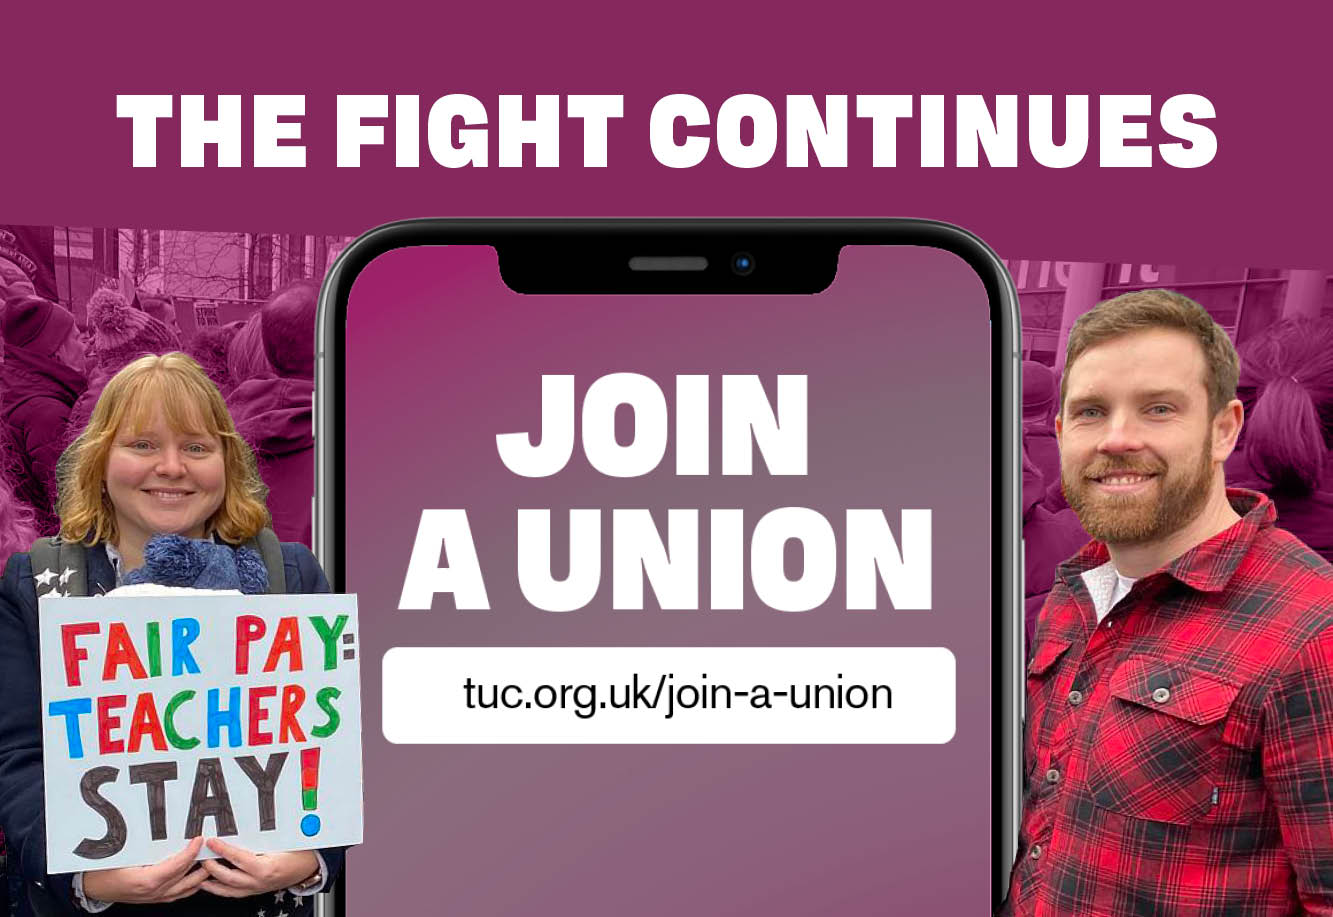 The fight continues: join a union today